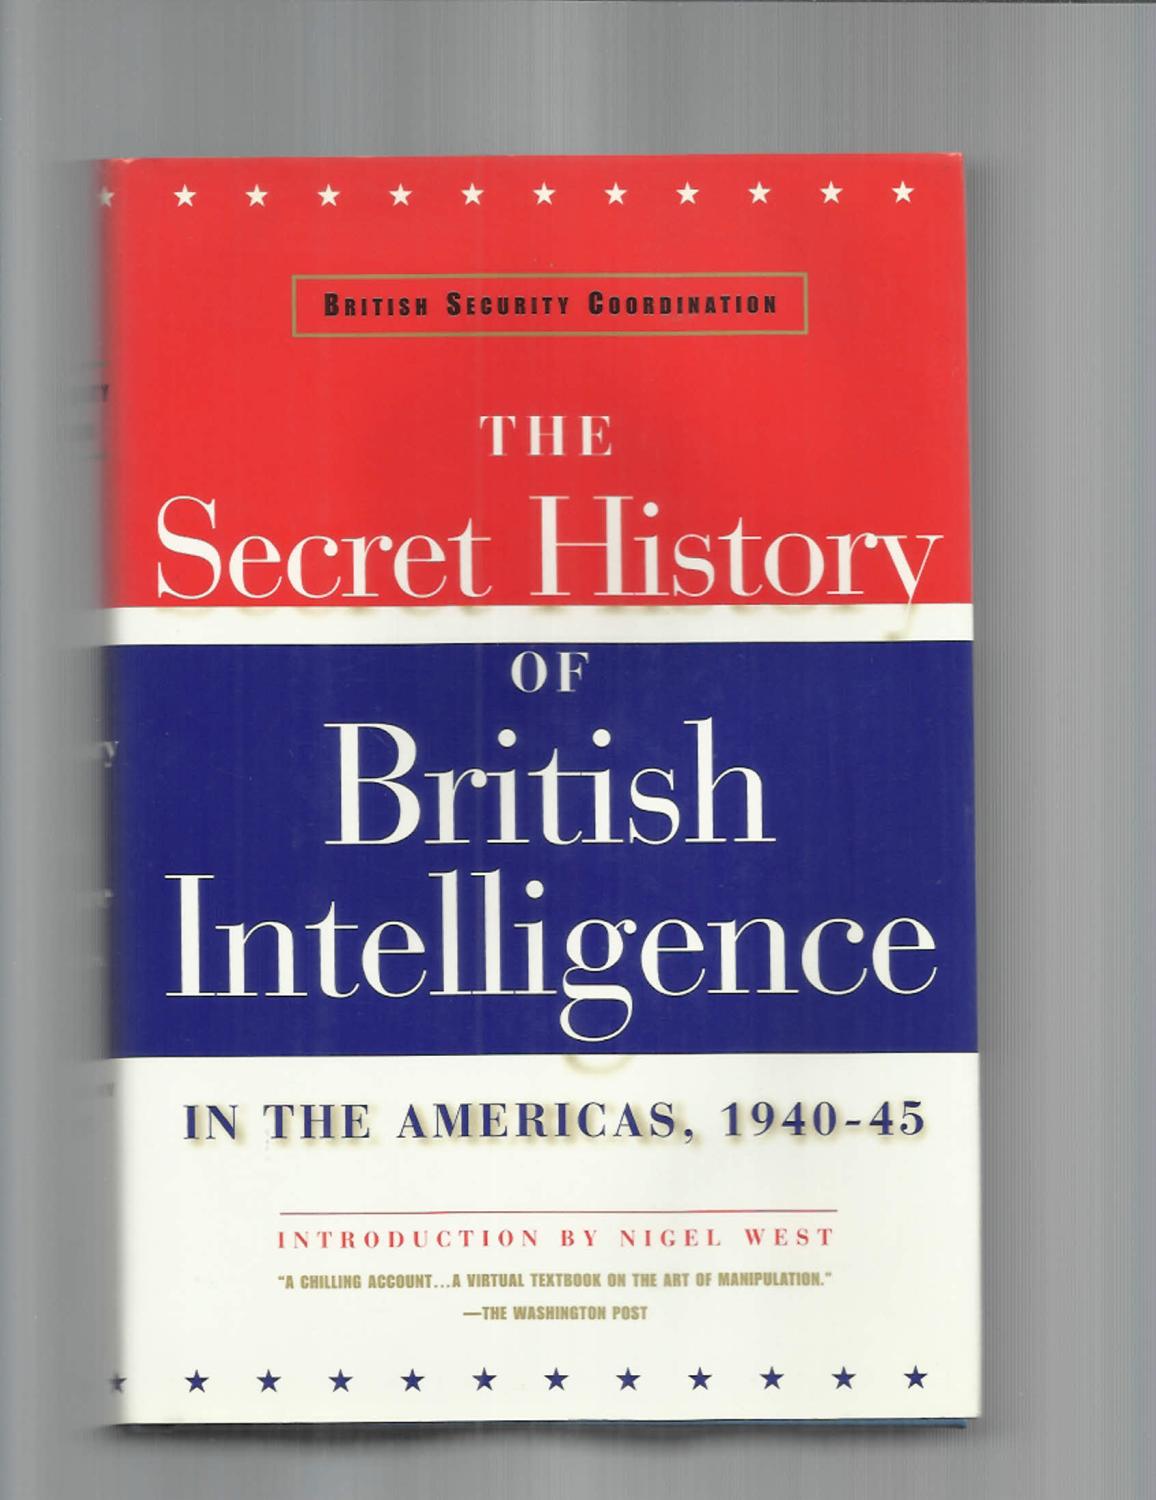 BRITISH SECURITY COORDINATION: The Secret History Of British Intelligence In The Americas, 1940~1945. Introduction By Nigel West. - William Samuel Stephenson (editor) & Nigel West